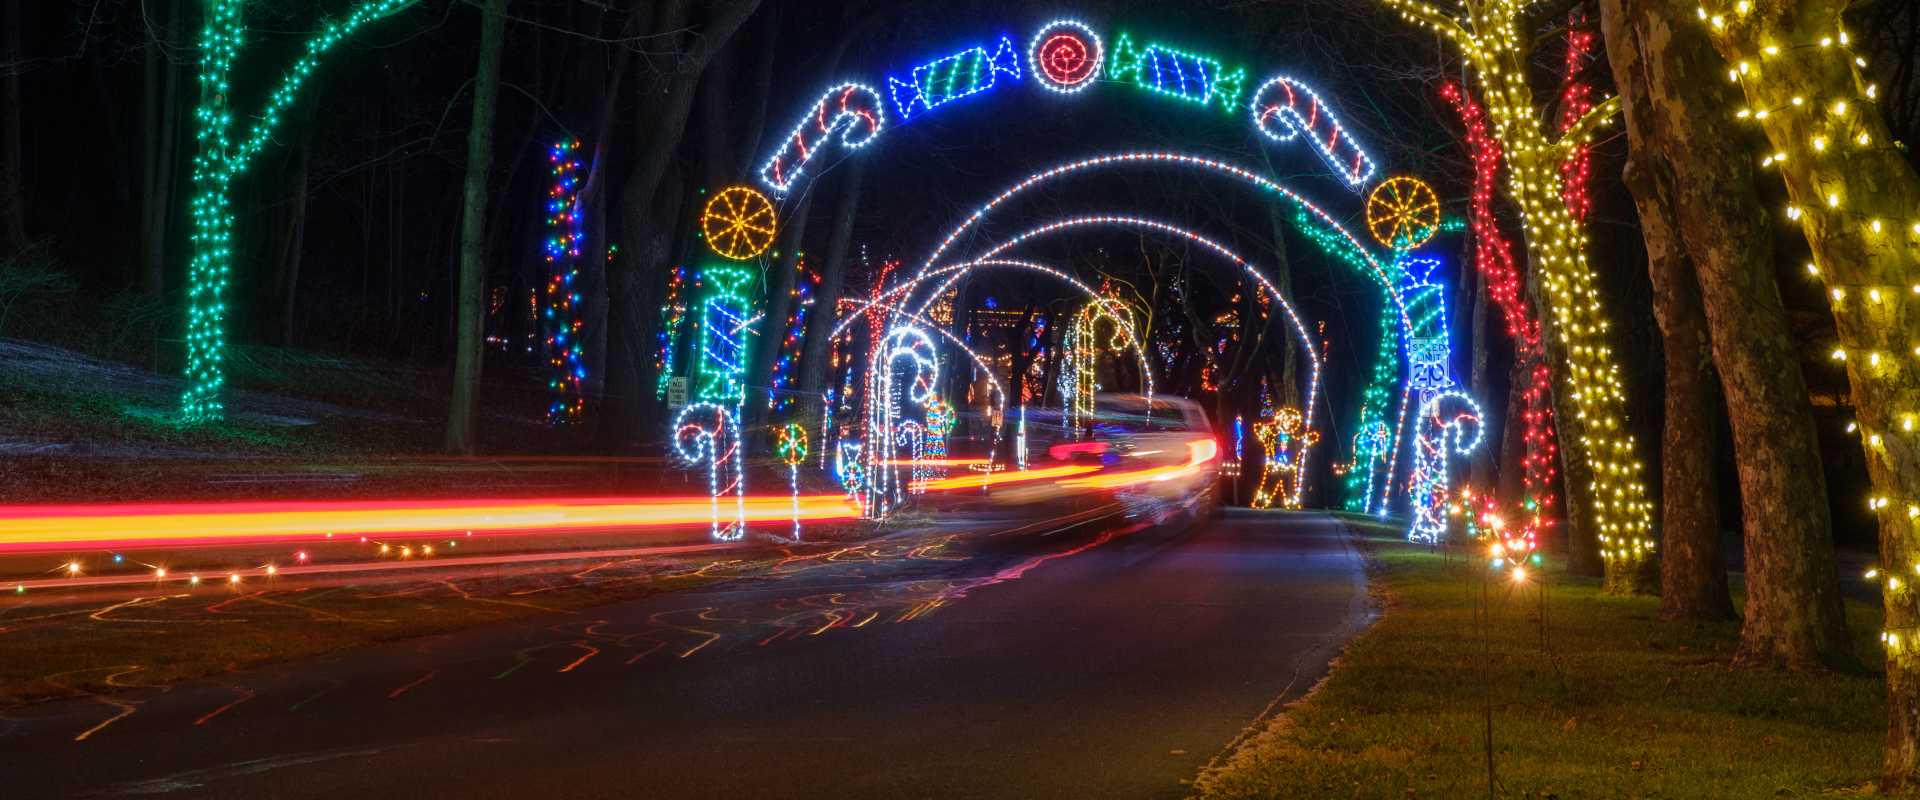 A car drives through Lights in the Parkway, Allentown